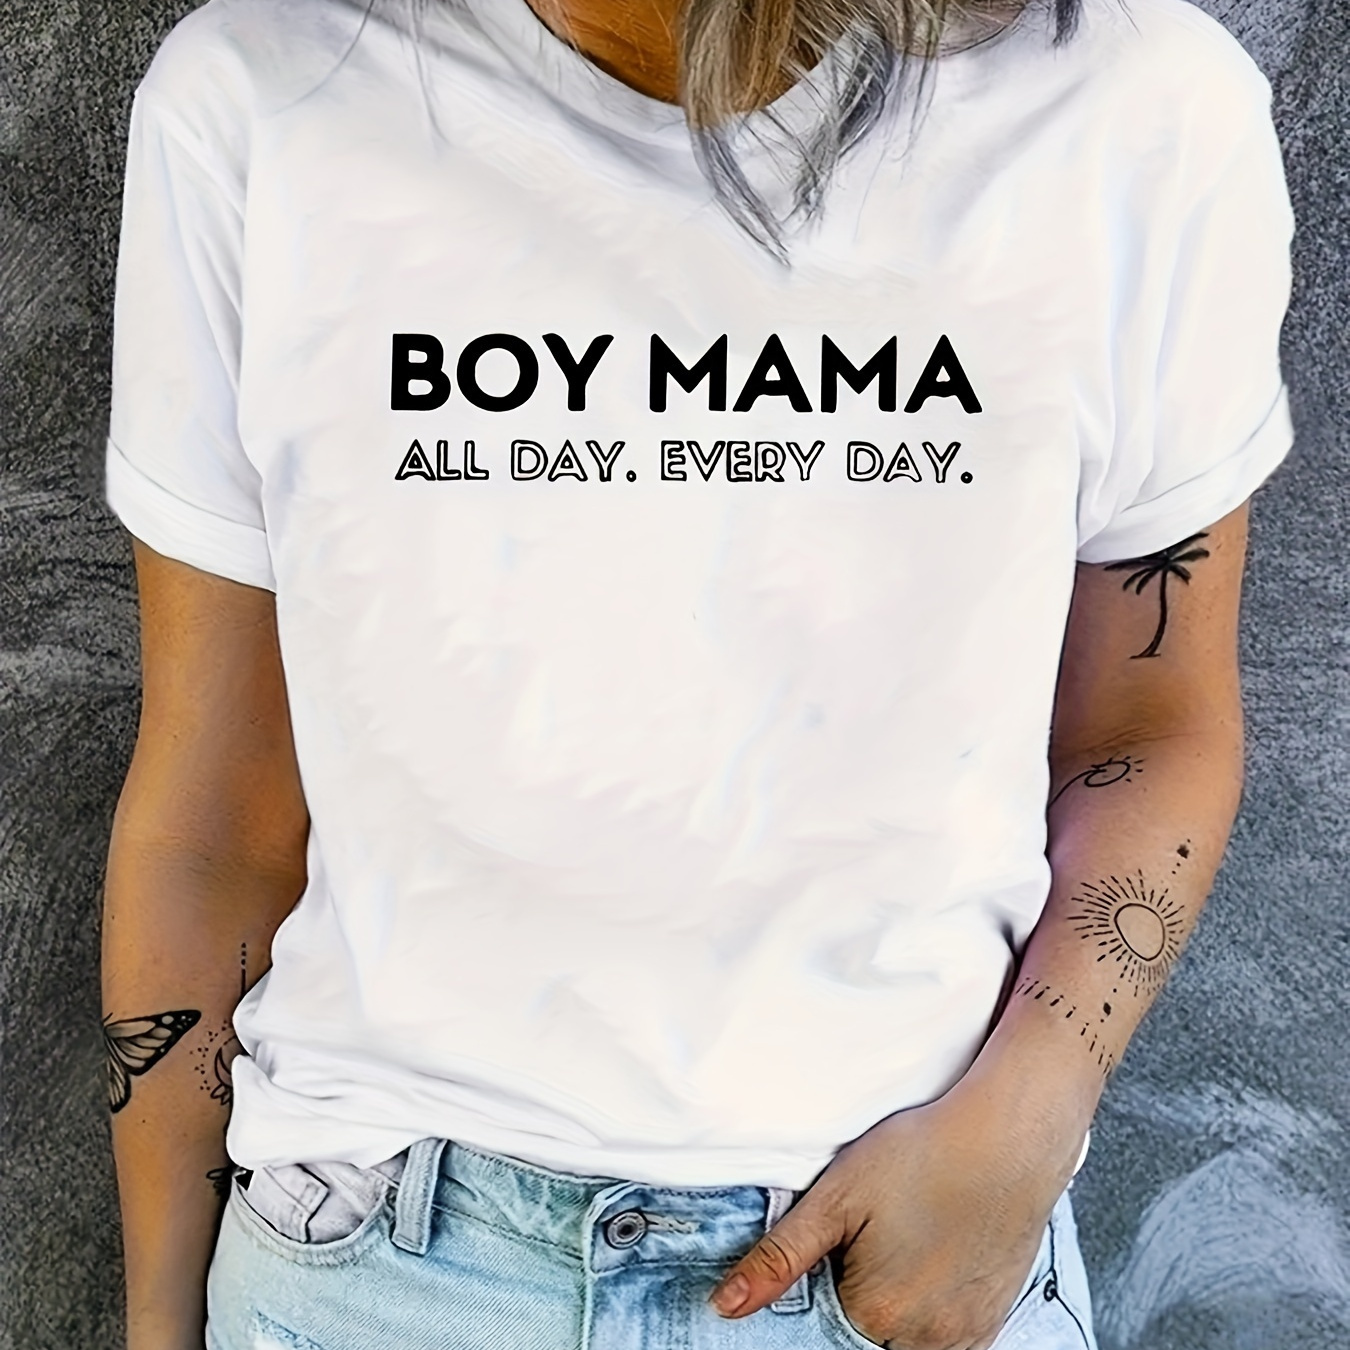 

Boy Mama Print T-shirt, Short Sleeve Crew Neck Casual Top For Summer & Spring, Women's Clothing